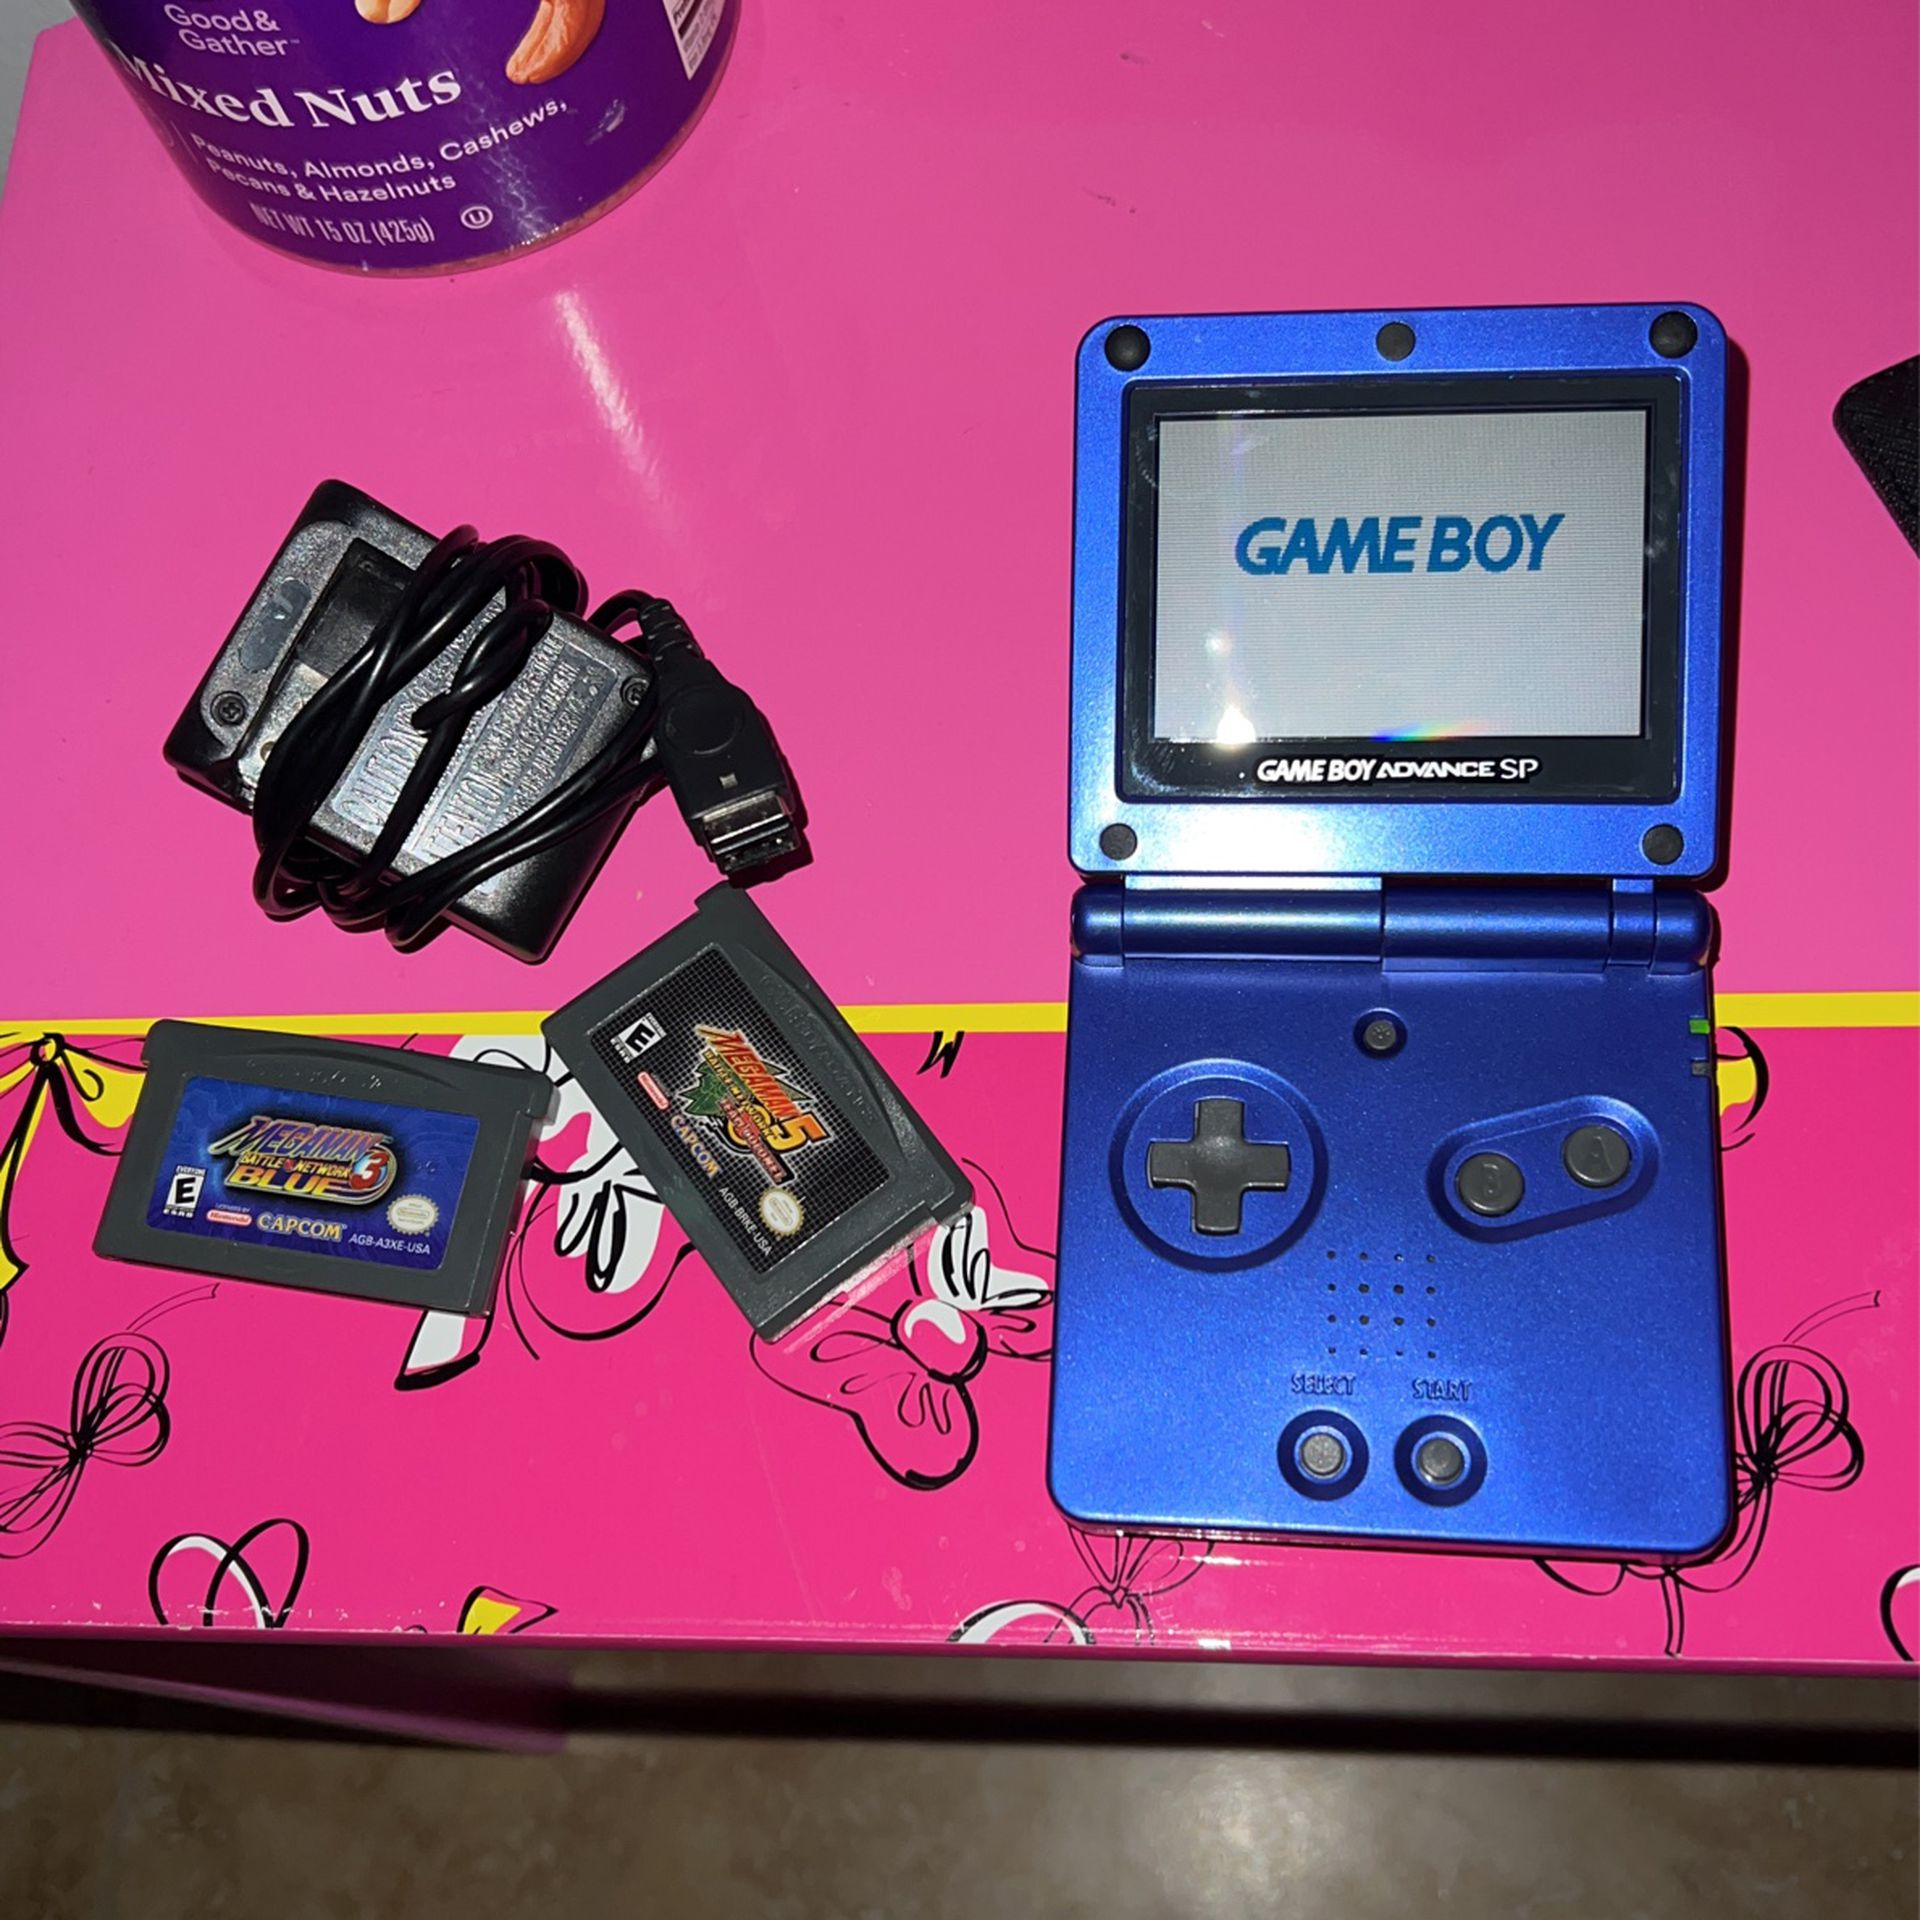 GBA SP Comes With 2 Games 